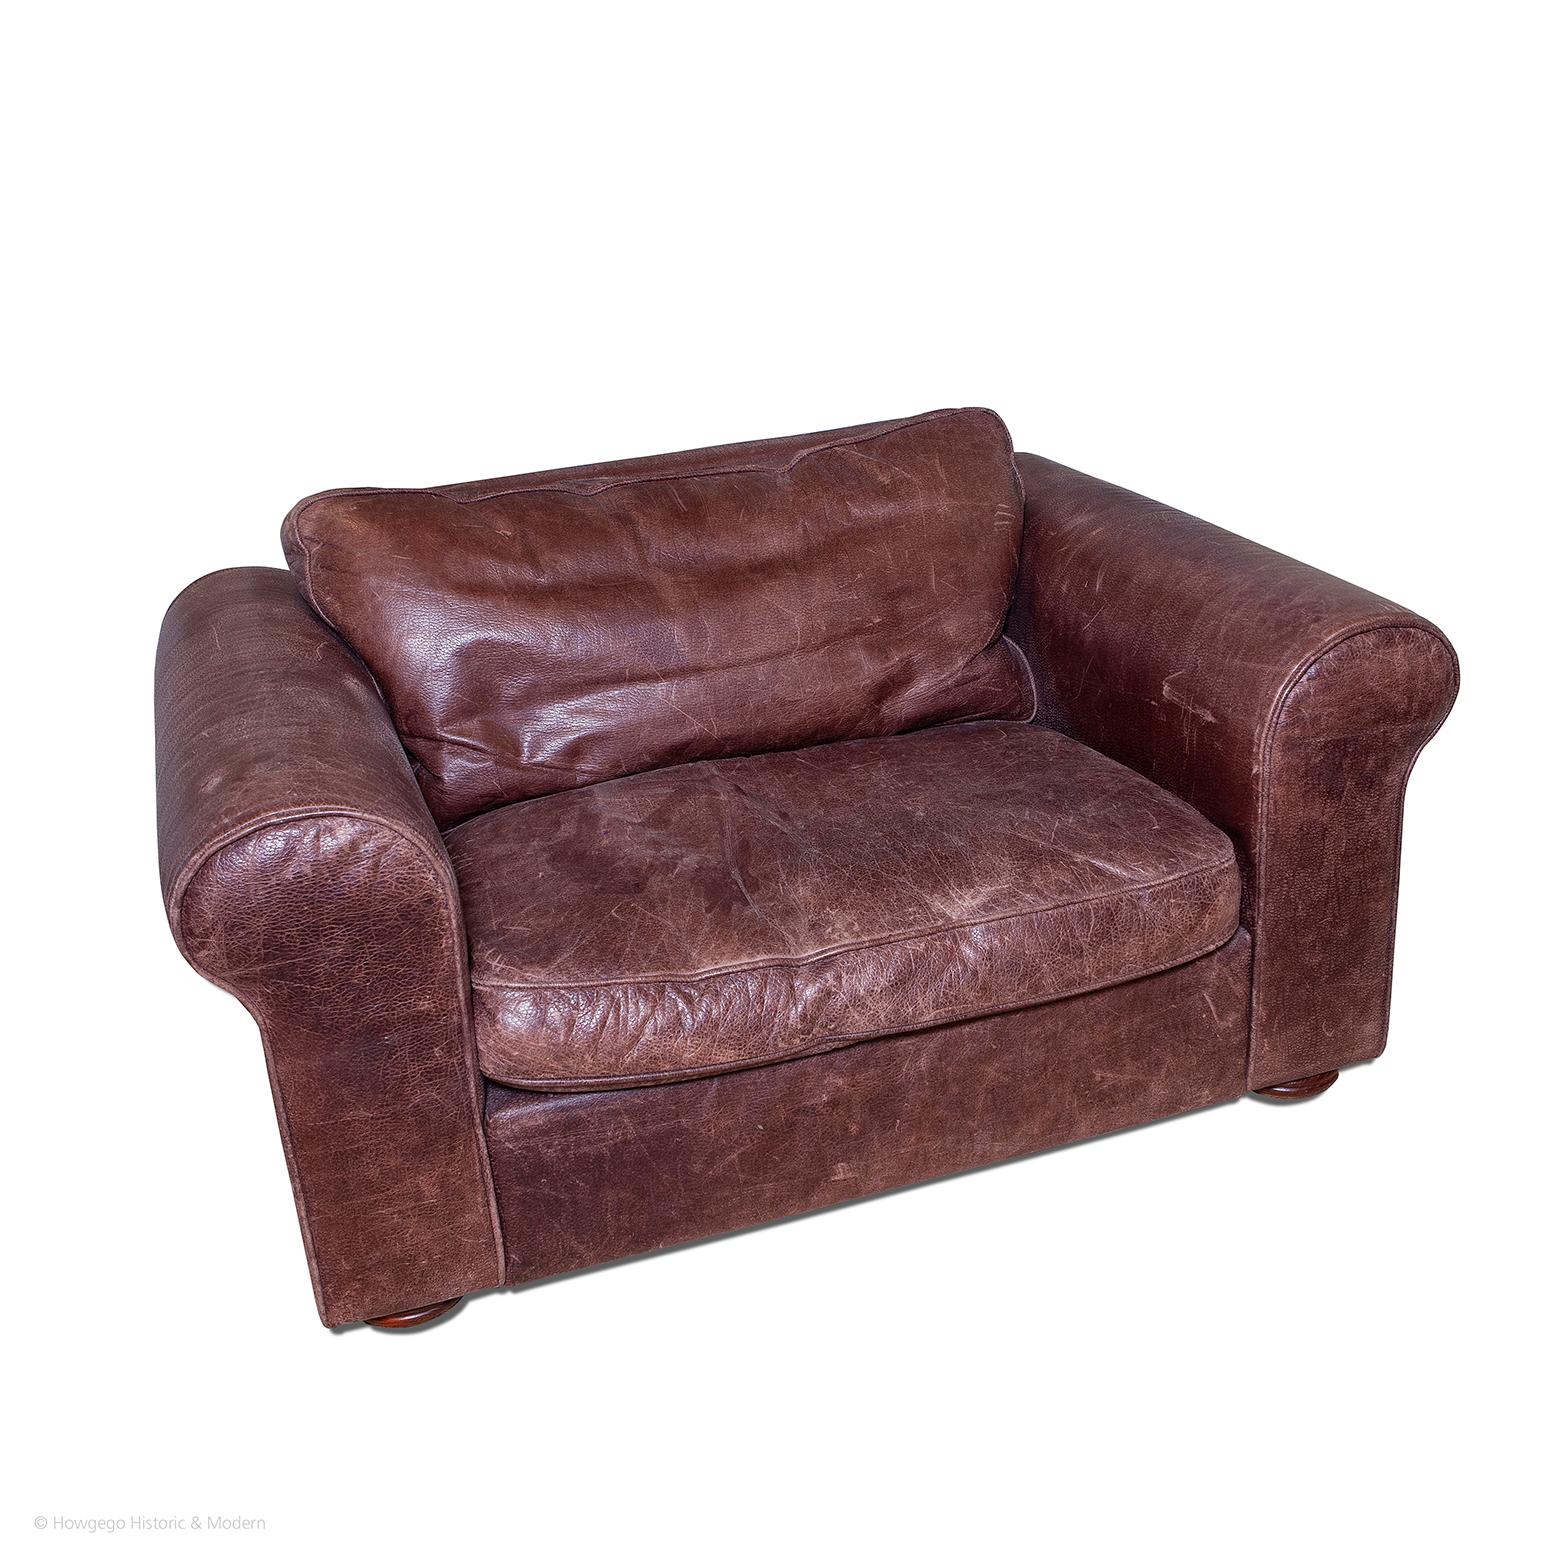 - The low. box form creates a relaxed, comfortable, versatile aesthetic blending with contemporary, modern, country house, club interiors and many more.
- Upholstered in a hard-wearing, brown leather which has a soft aged patina, child and pet